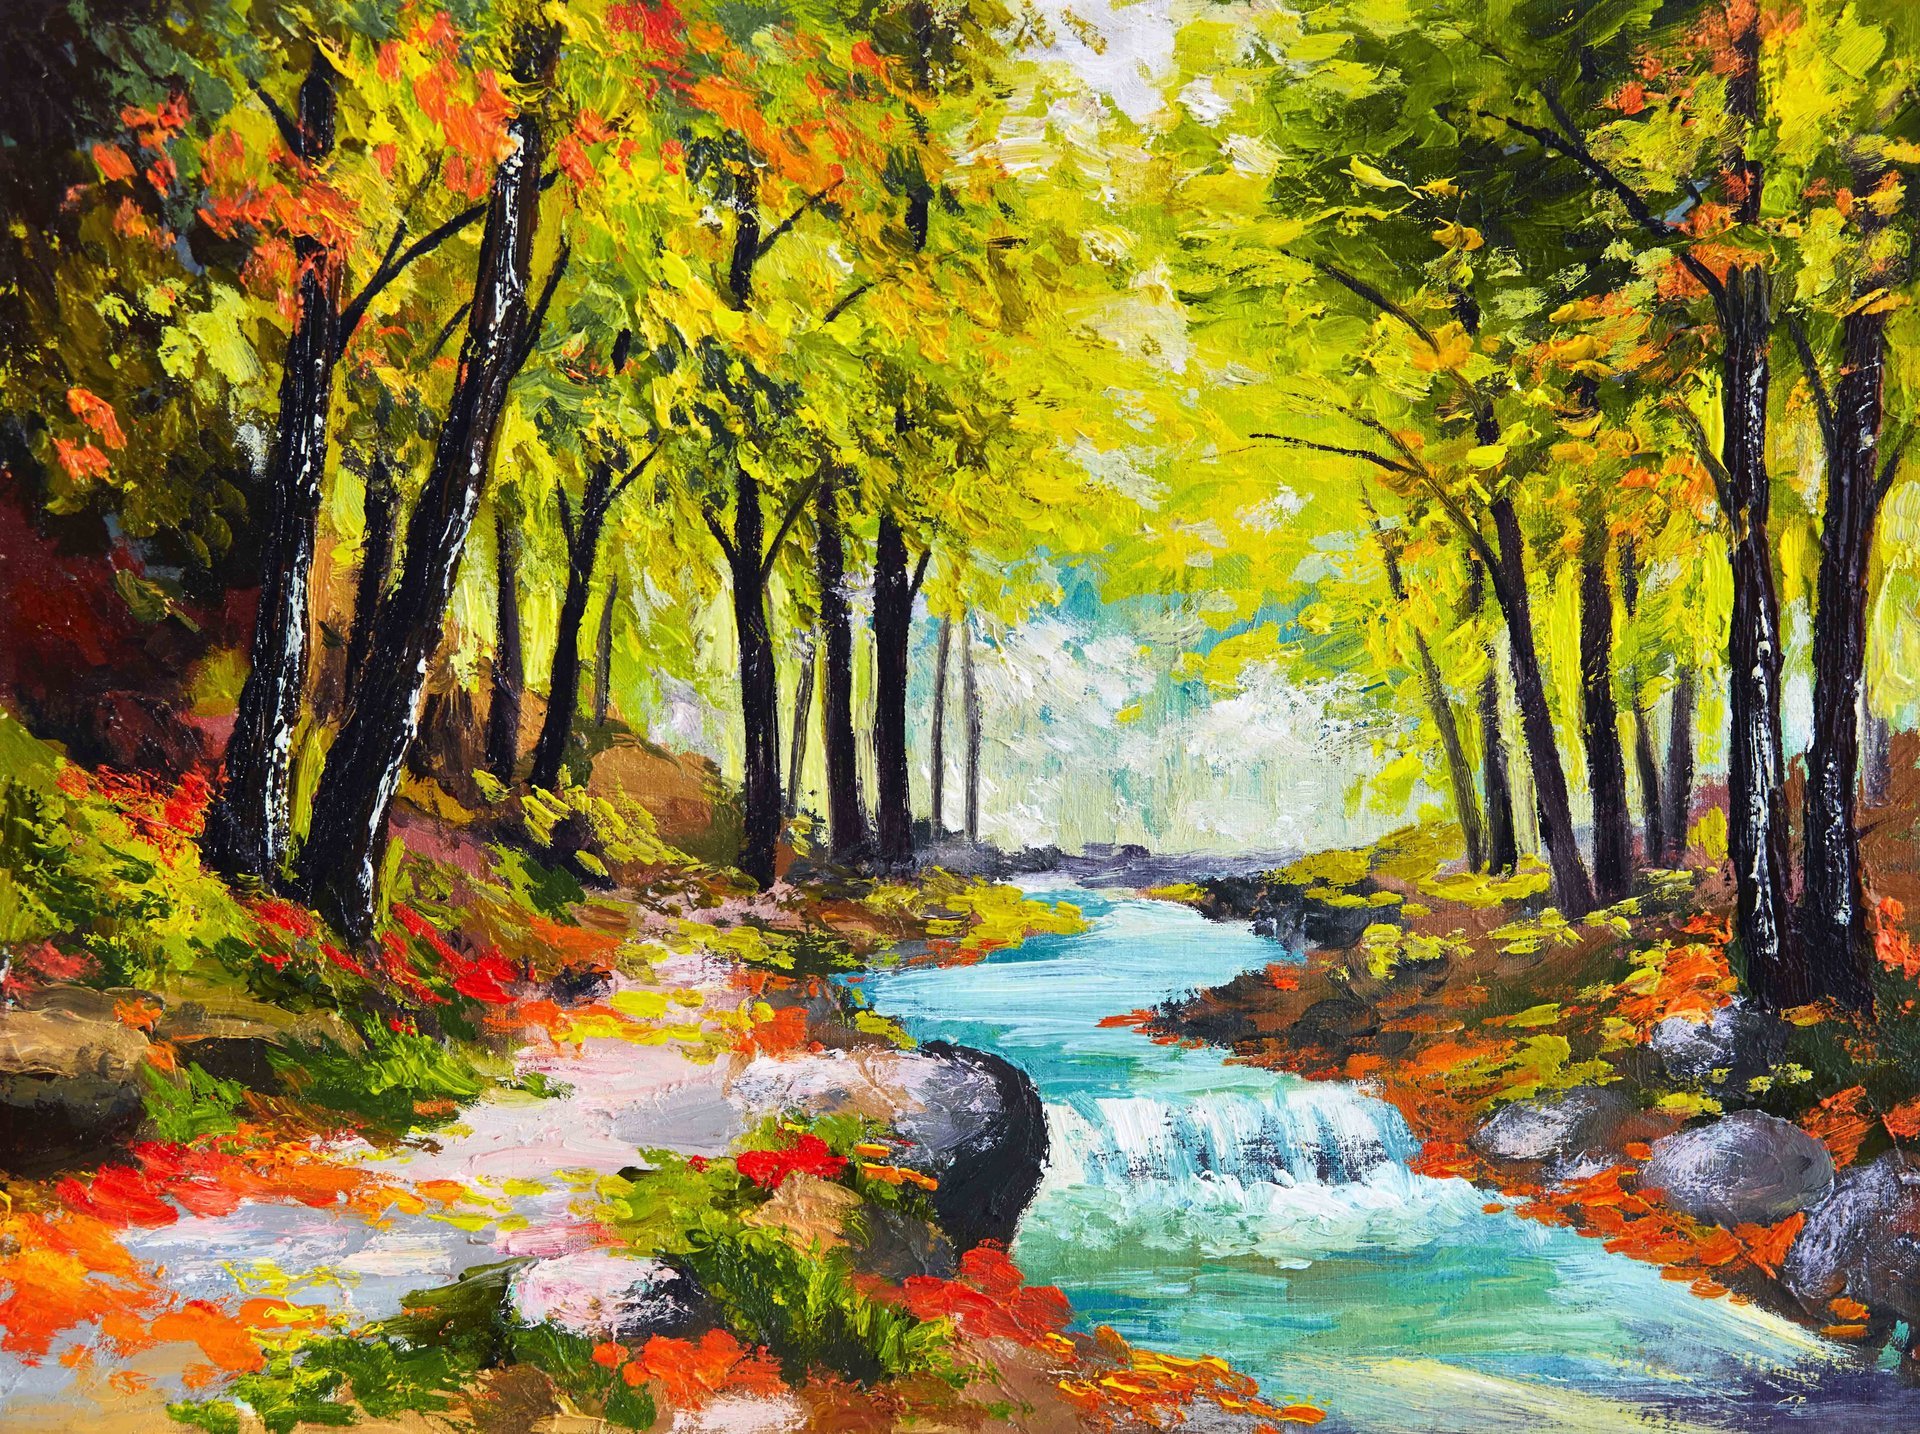 oil painting wallpaper hd,natural landscape,nature,painting,tree,watercolor paint